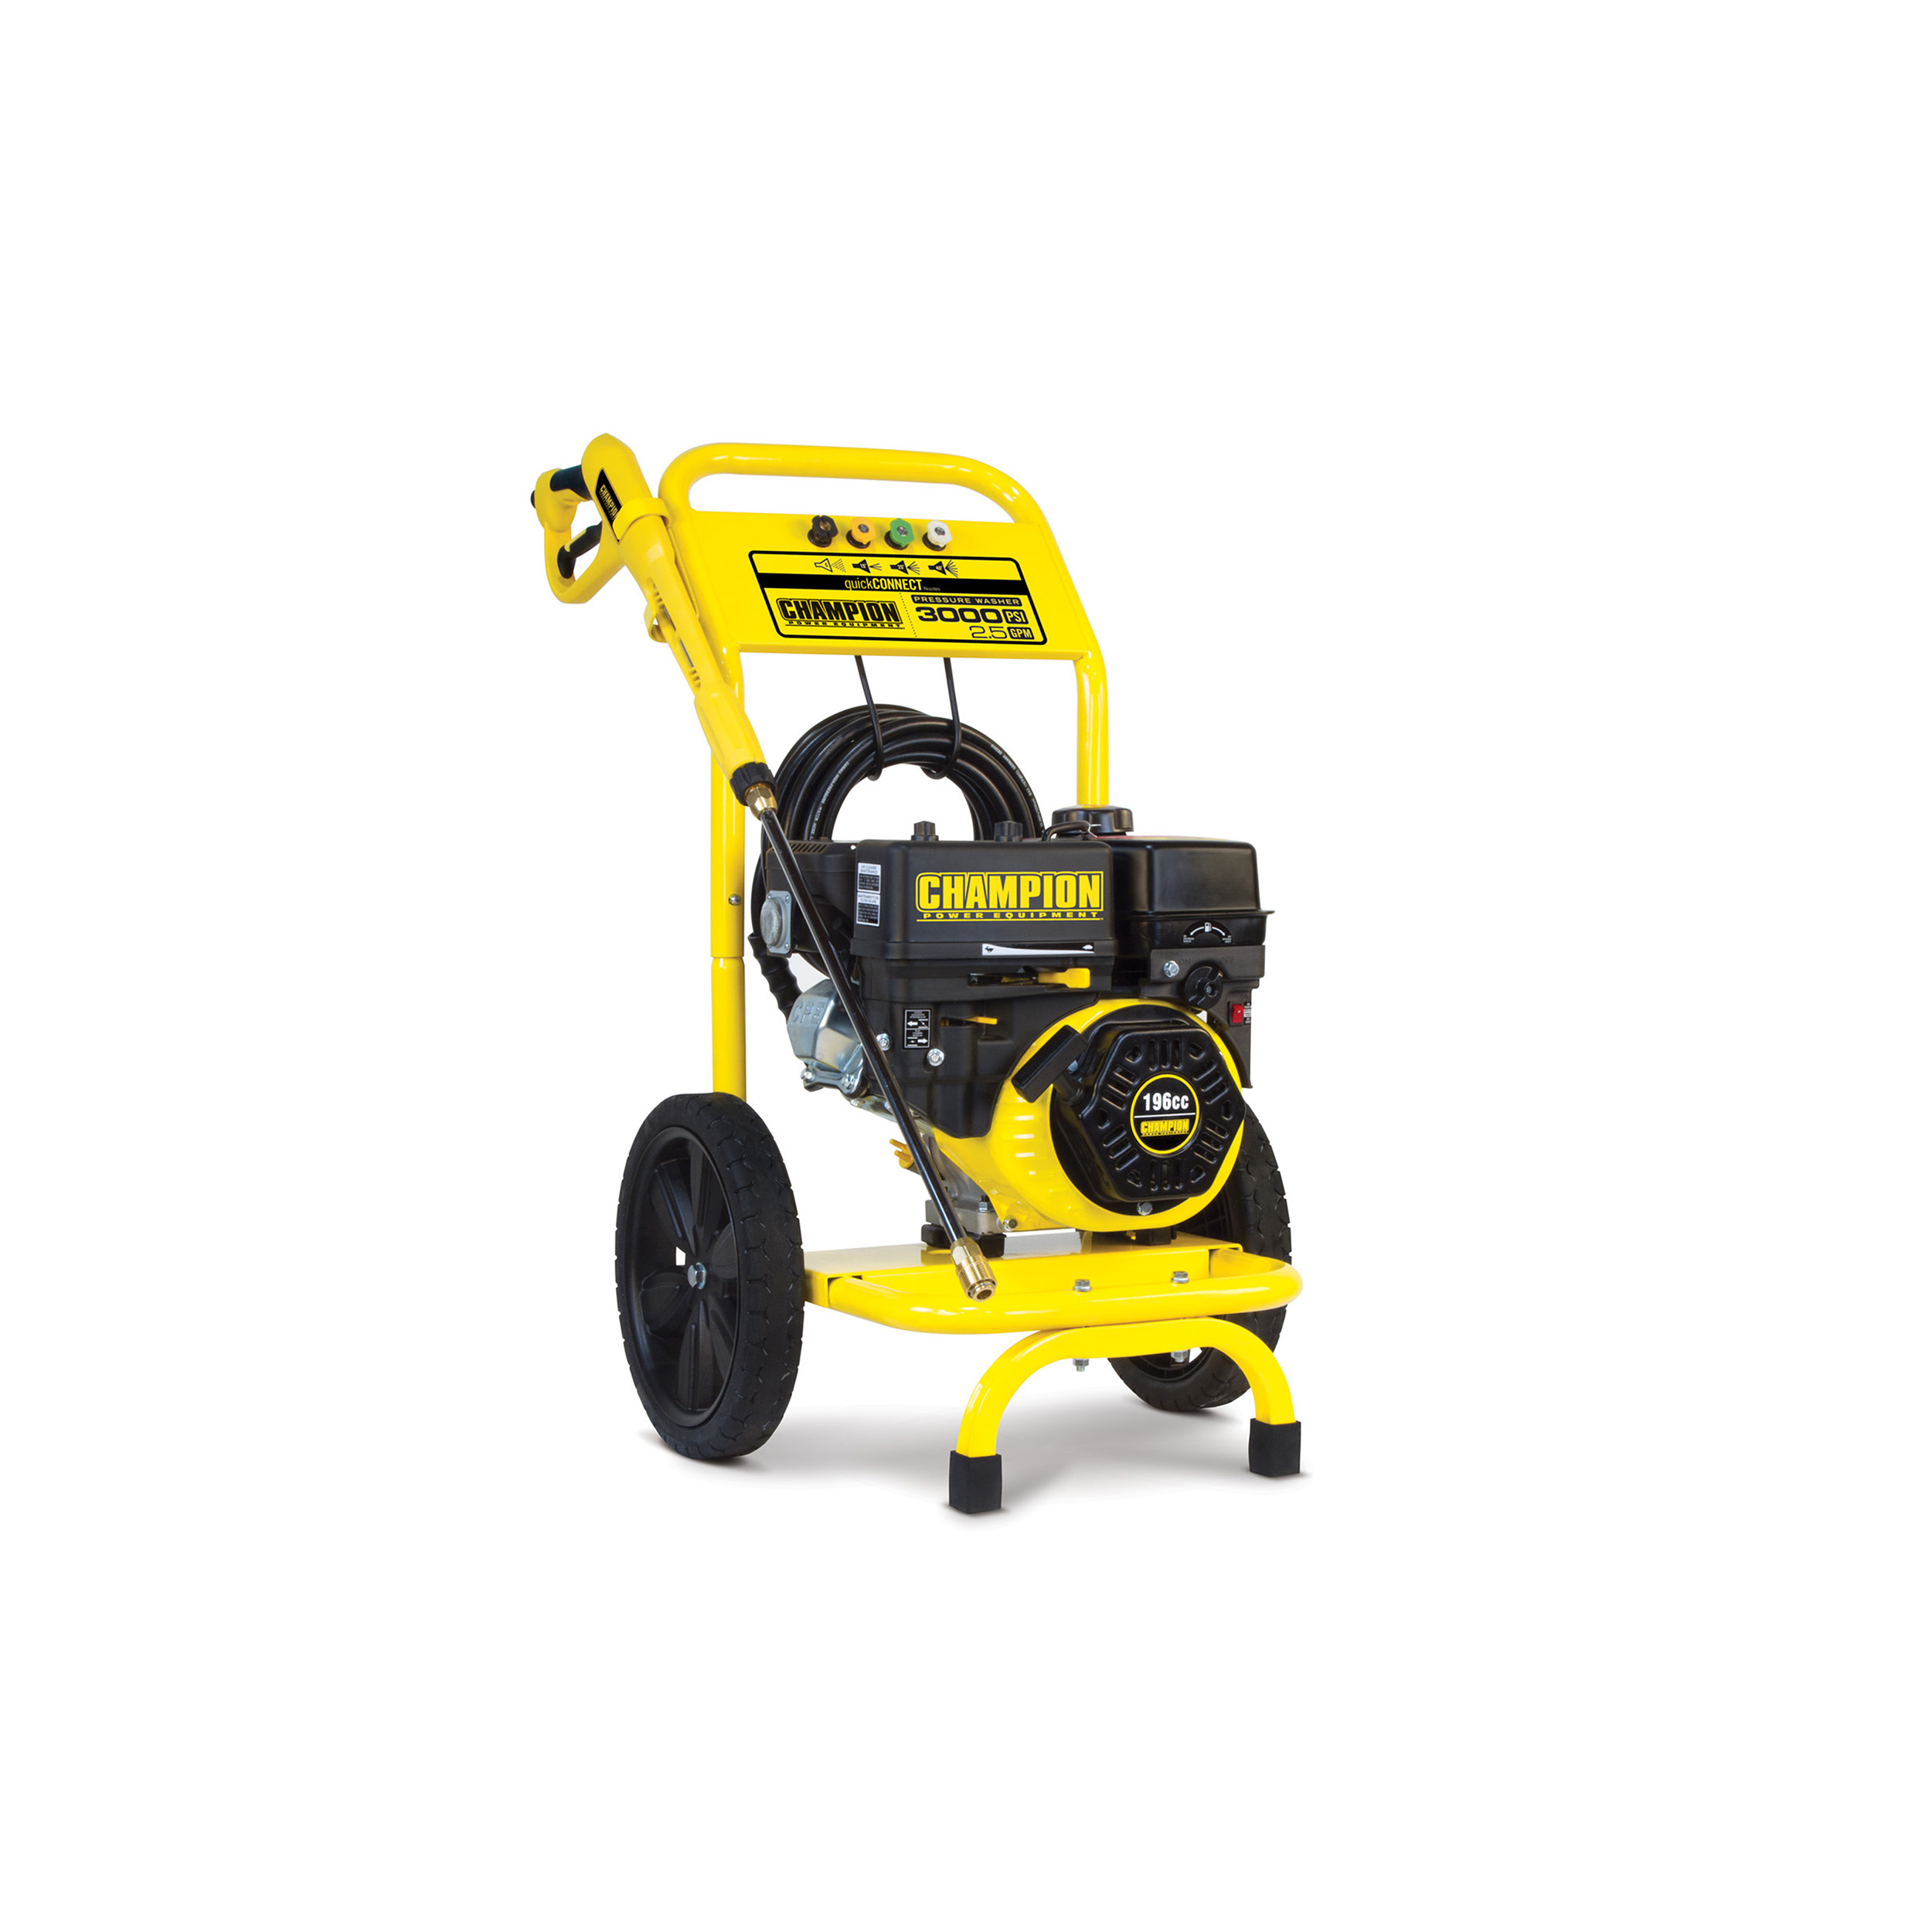 Champion 3000 Psi Pressure Washer, Carb Certified, Model 76525